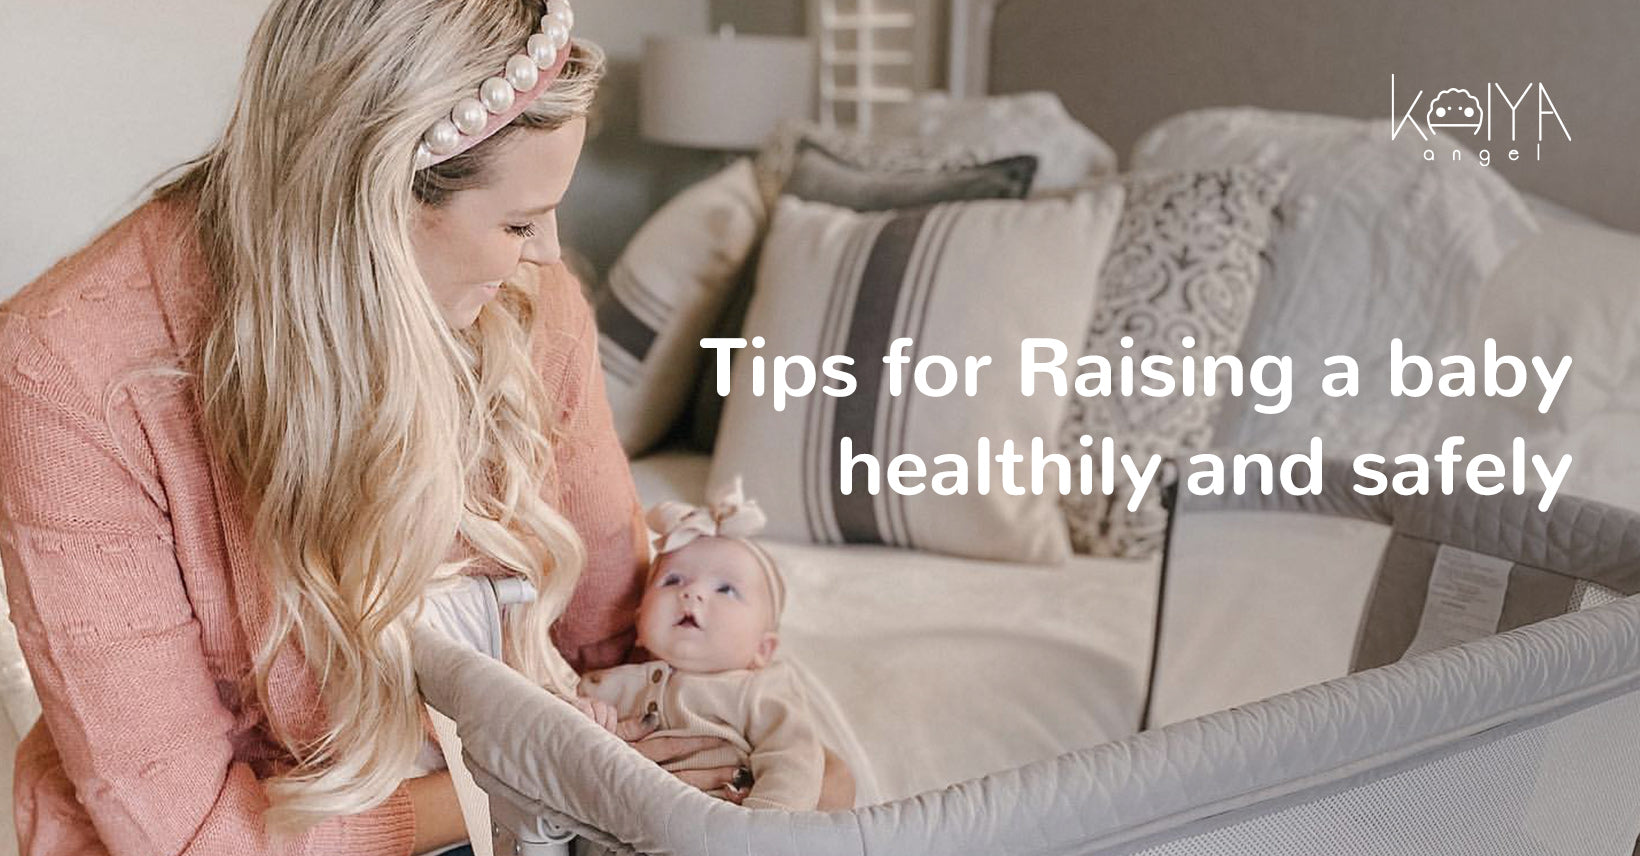 Tips for Raising a baby healthily and safely